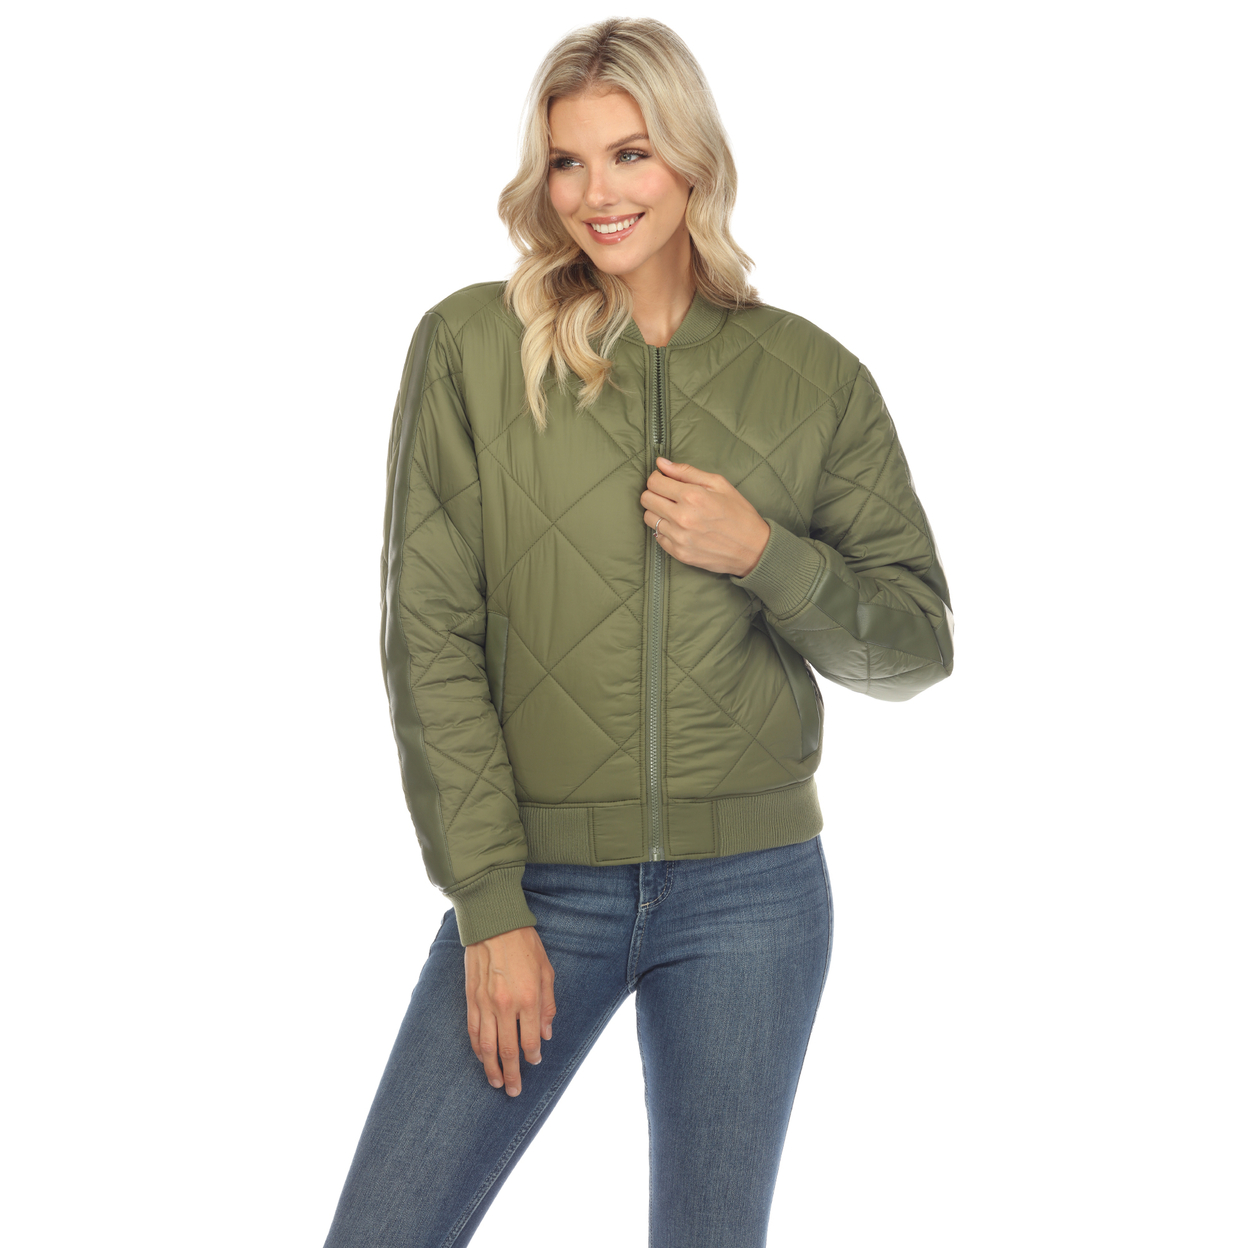 White Mark Women's Quilted Puffer Bomber Jacket - Olive, 2x